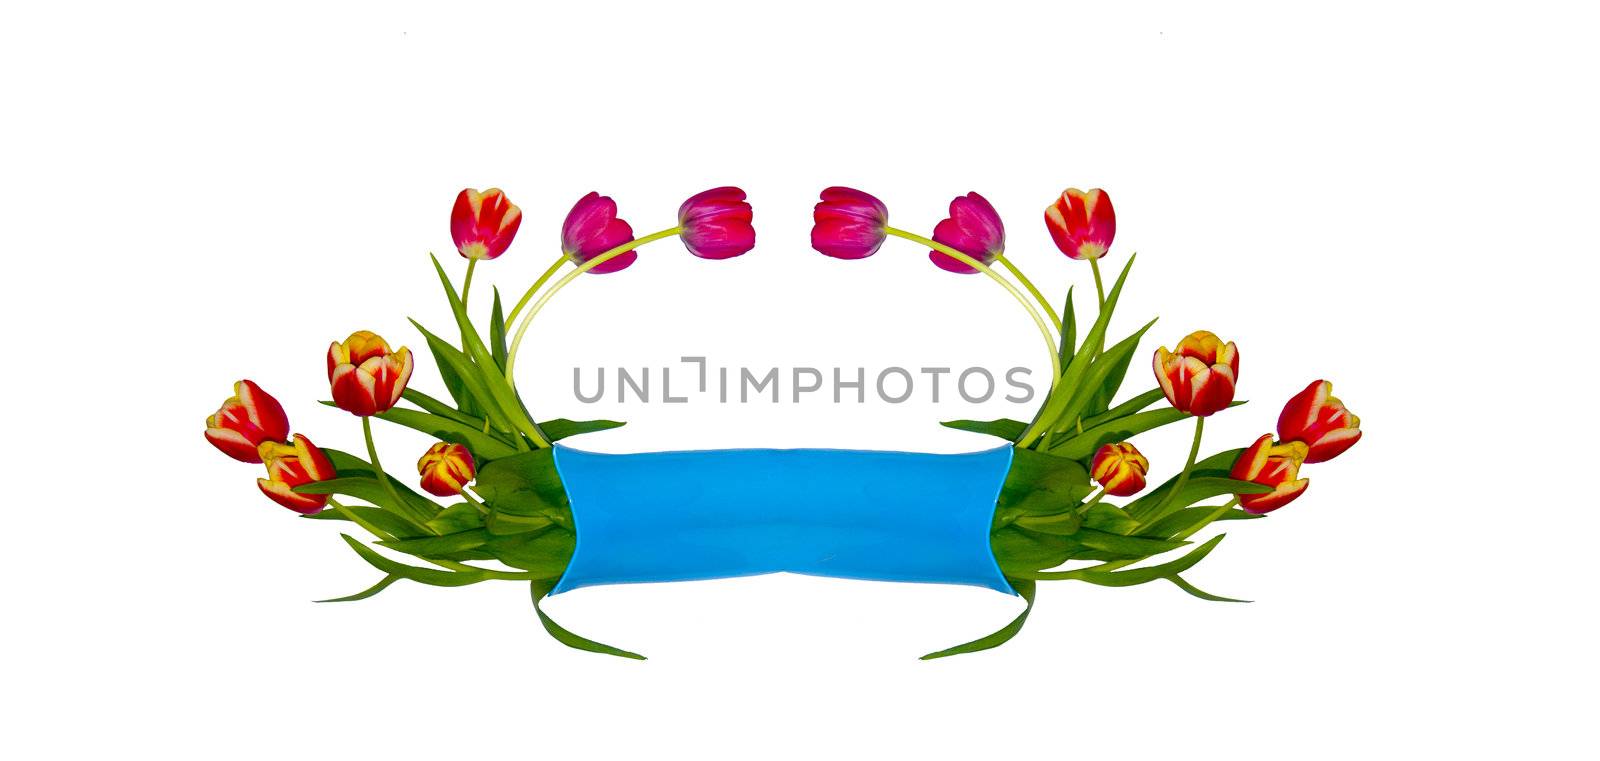 Vignette from tulips1 by soloir